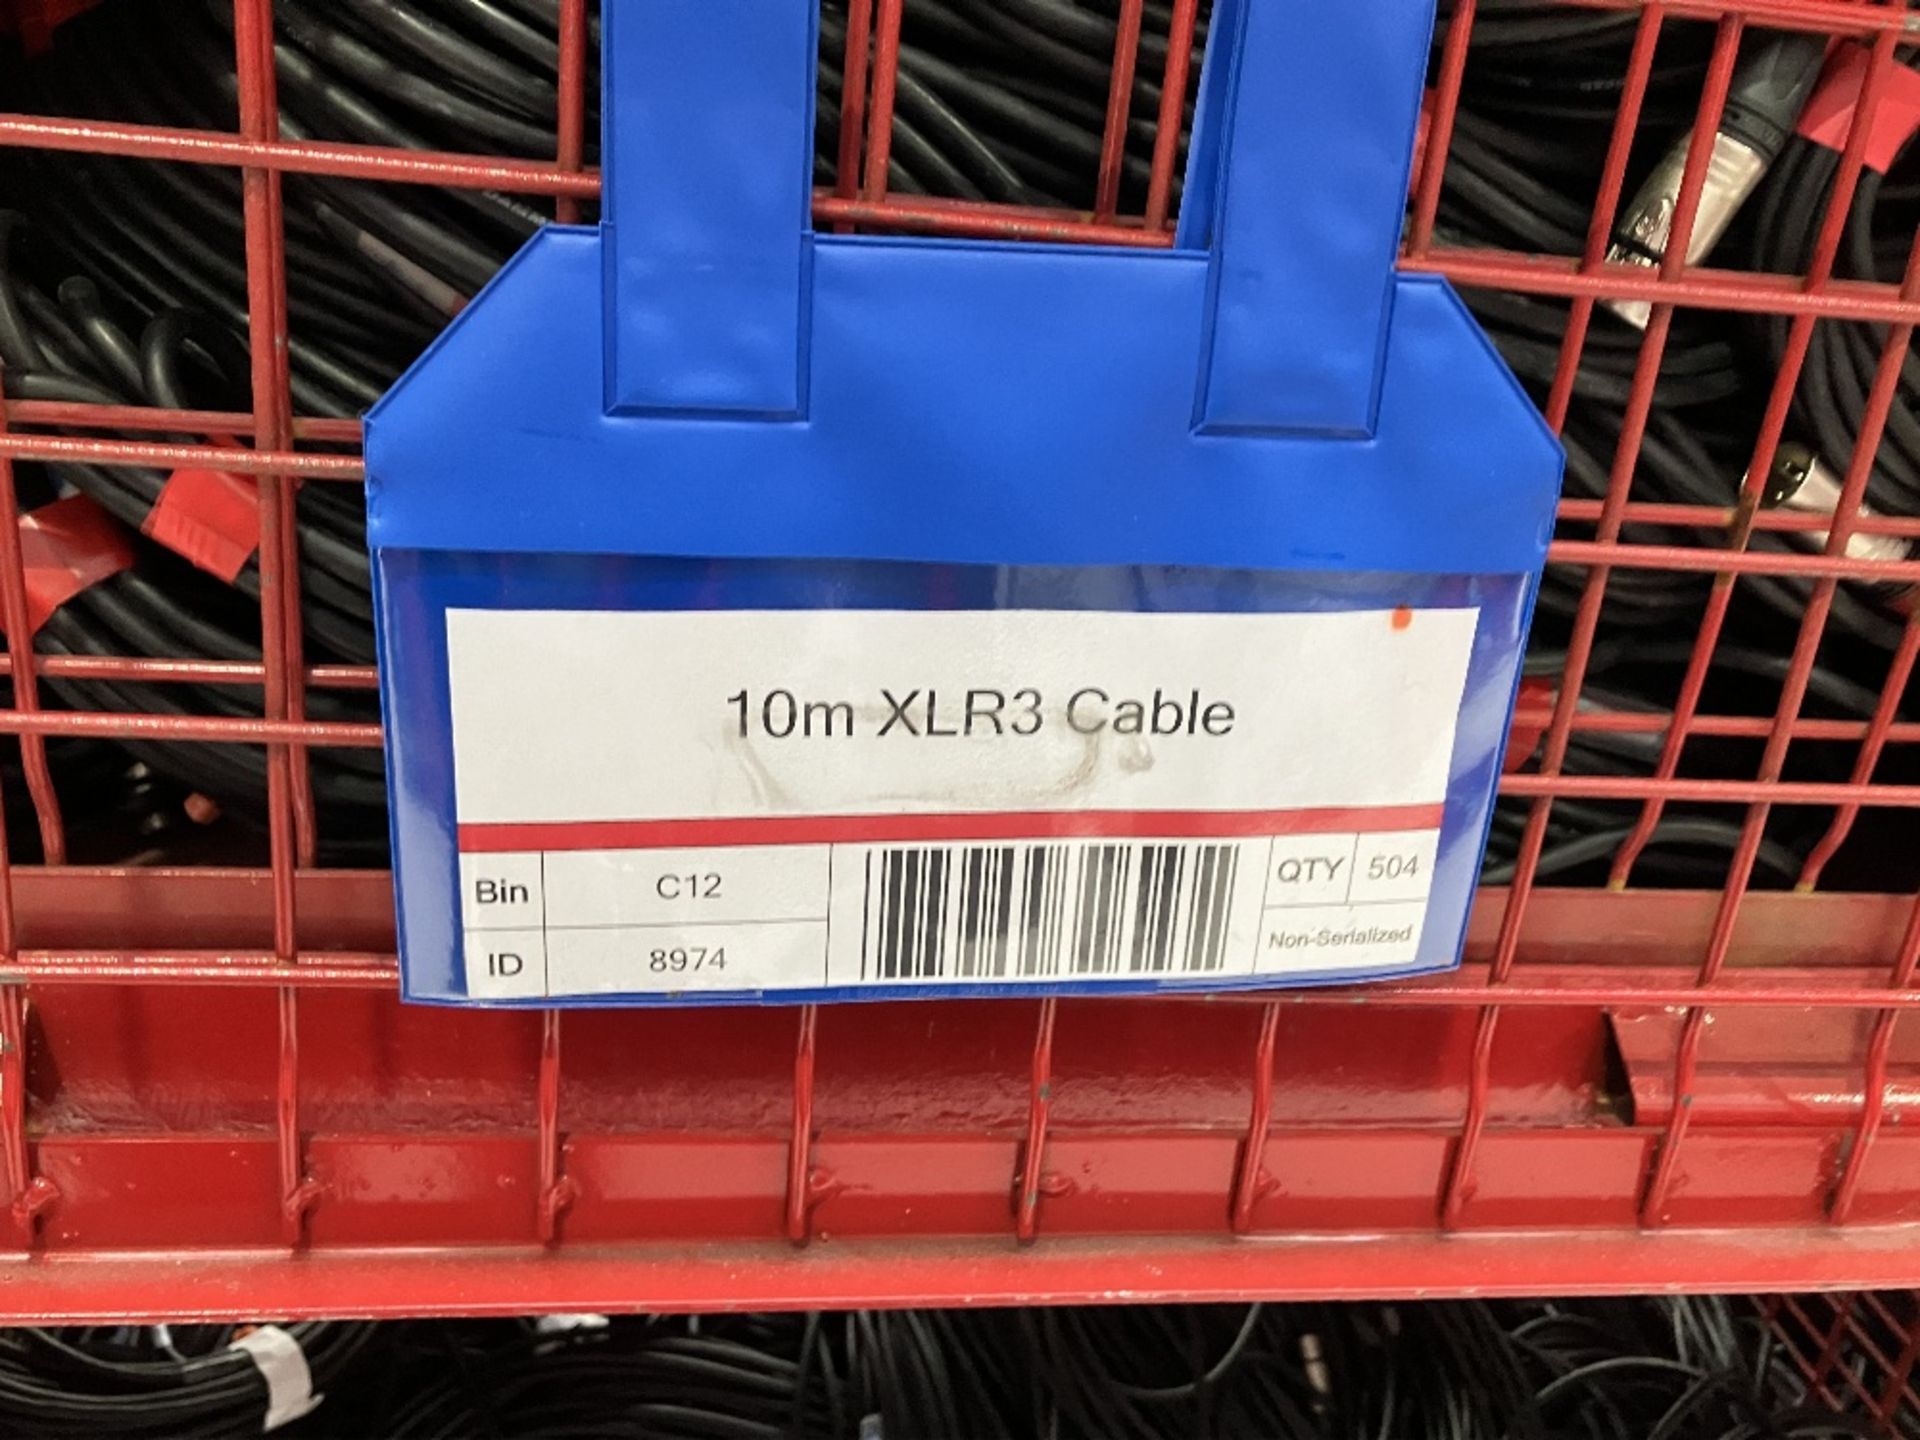 Large Quantity of 10m XLR3 Cable with Steel Fabricated Stillage - Image 2 of 5